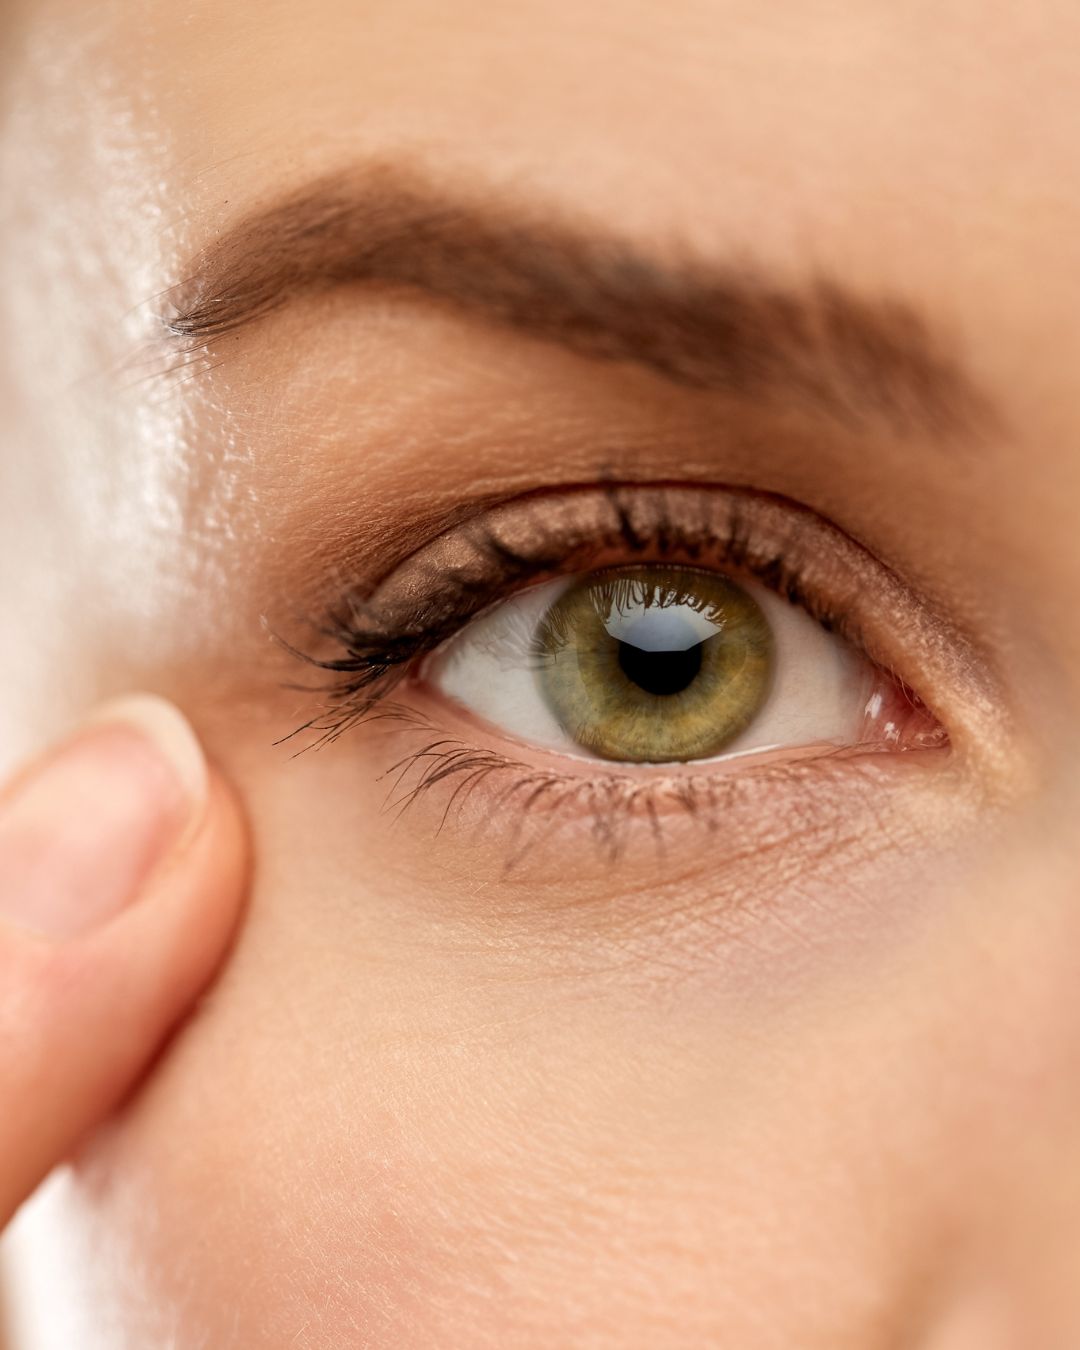 What happens when you stop using a lash growth serum?